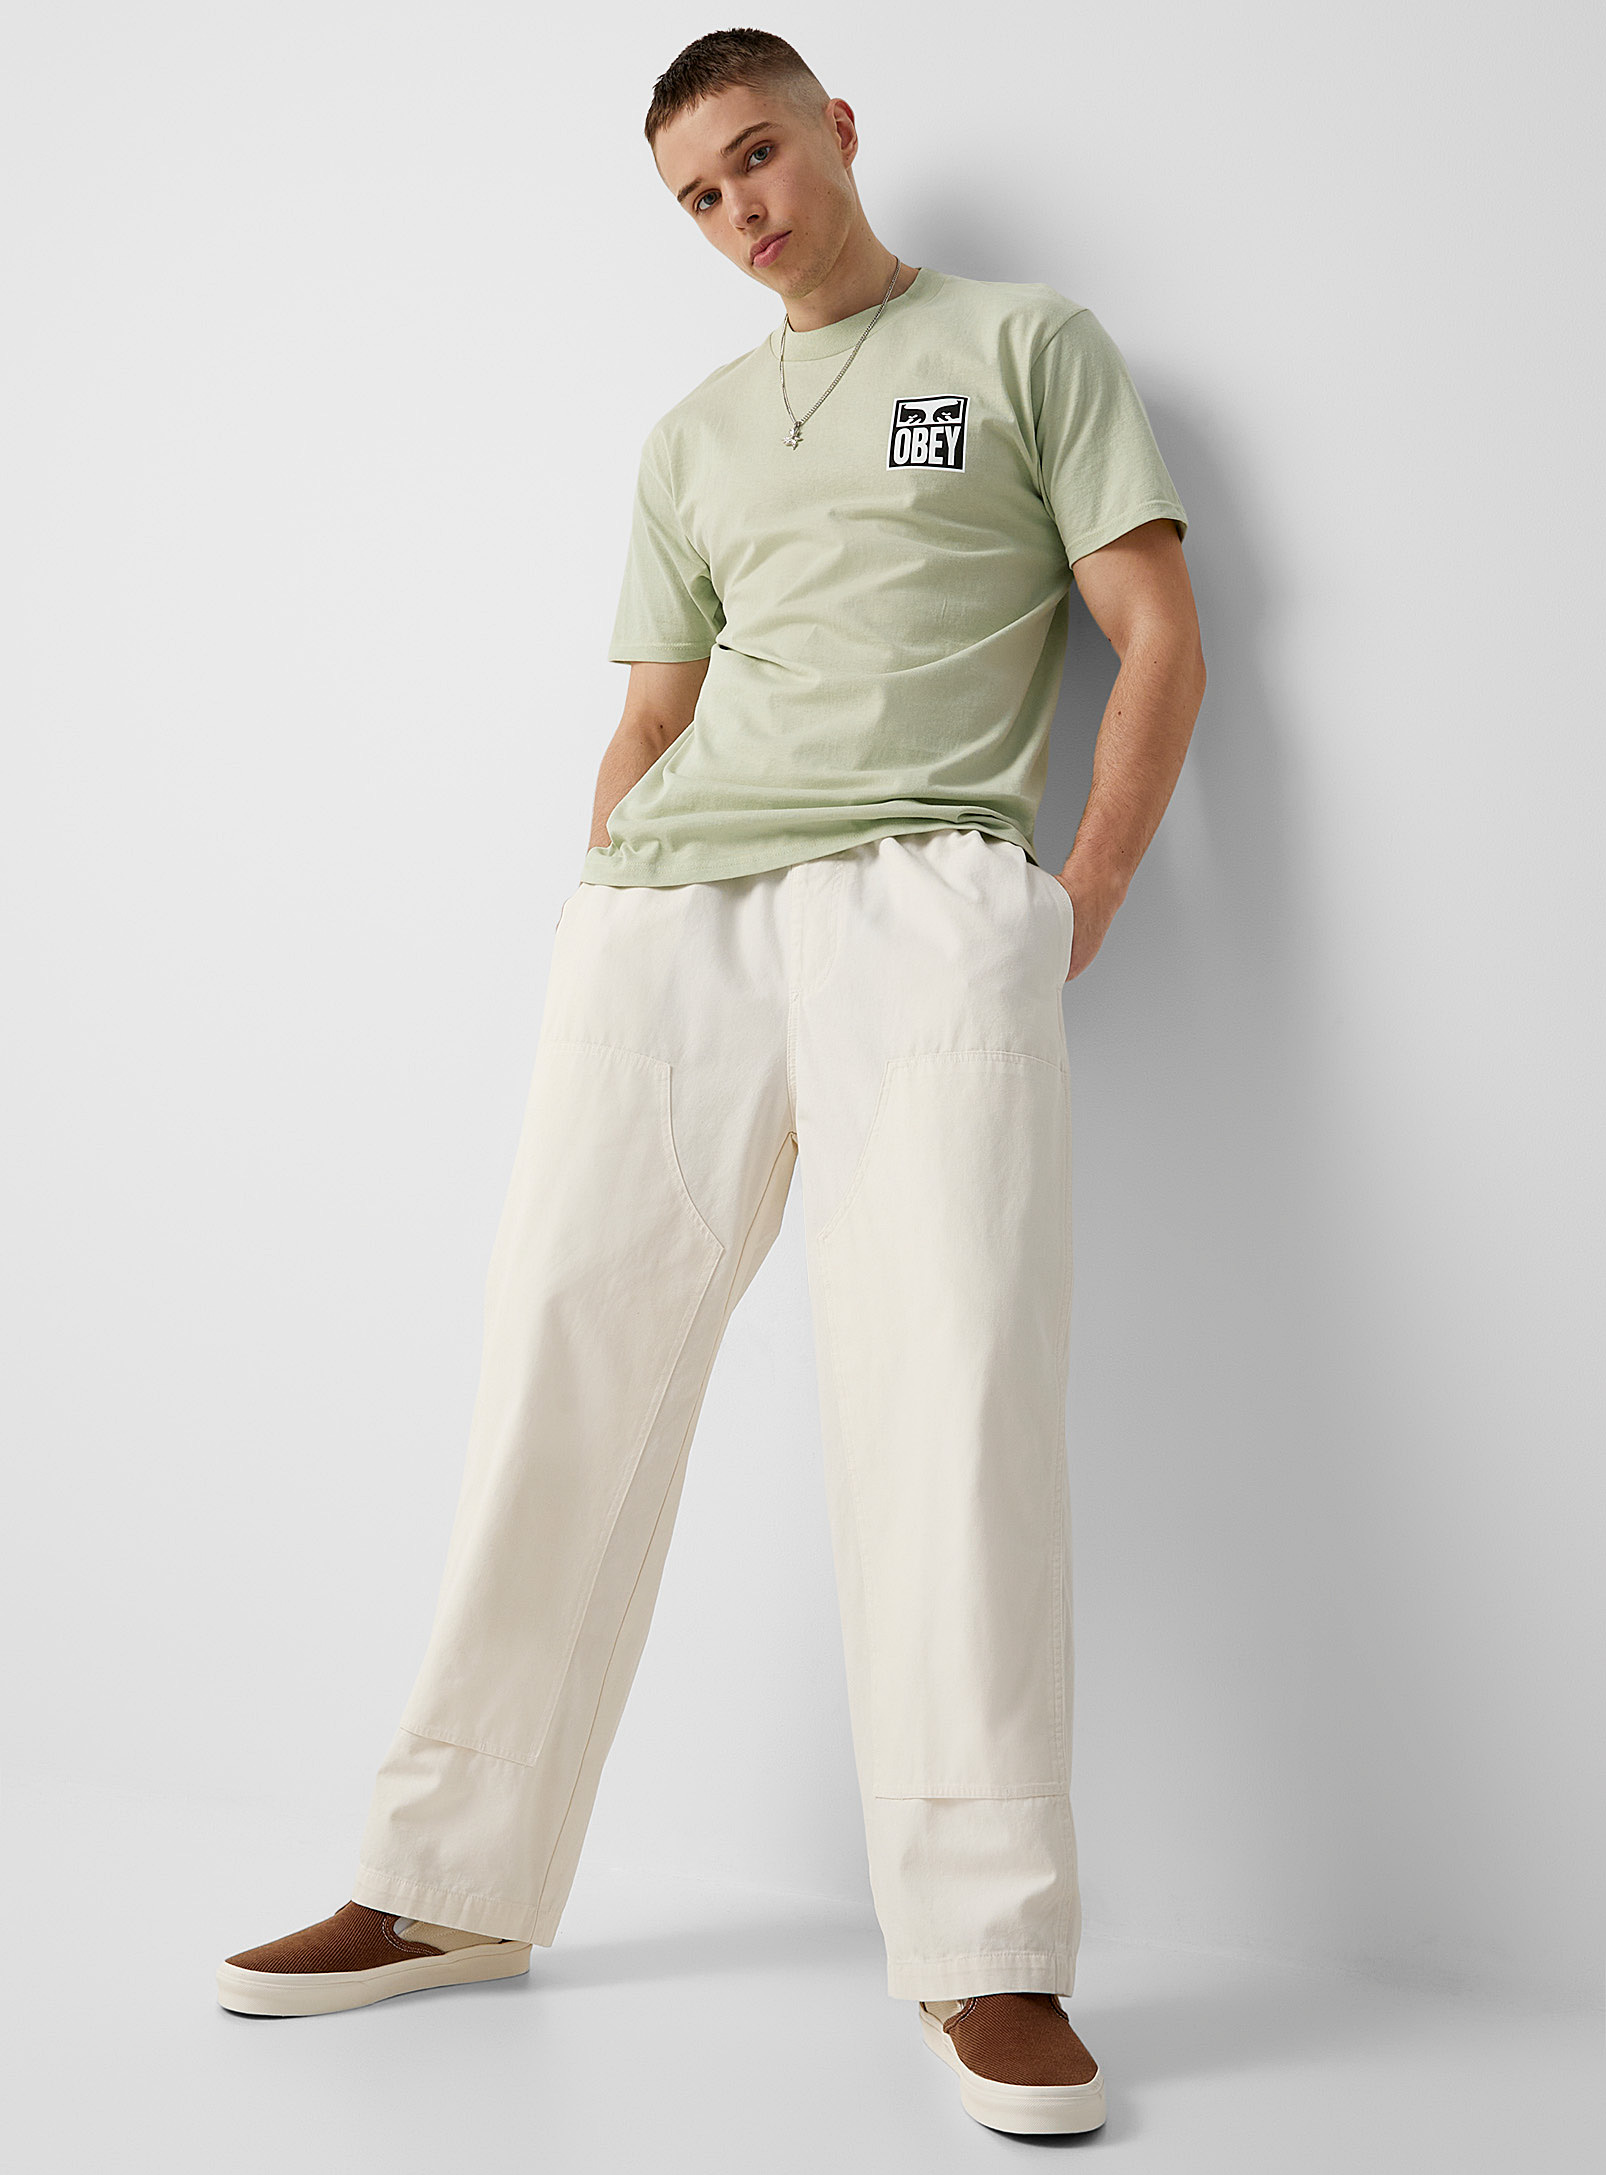 Obey Big Easy Canvas Pant In Cream Beige | ModeSens